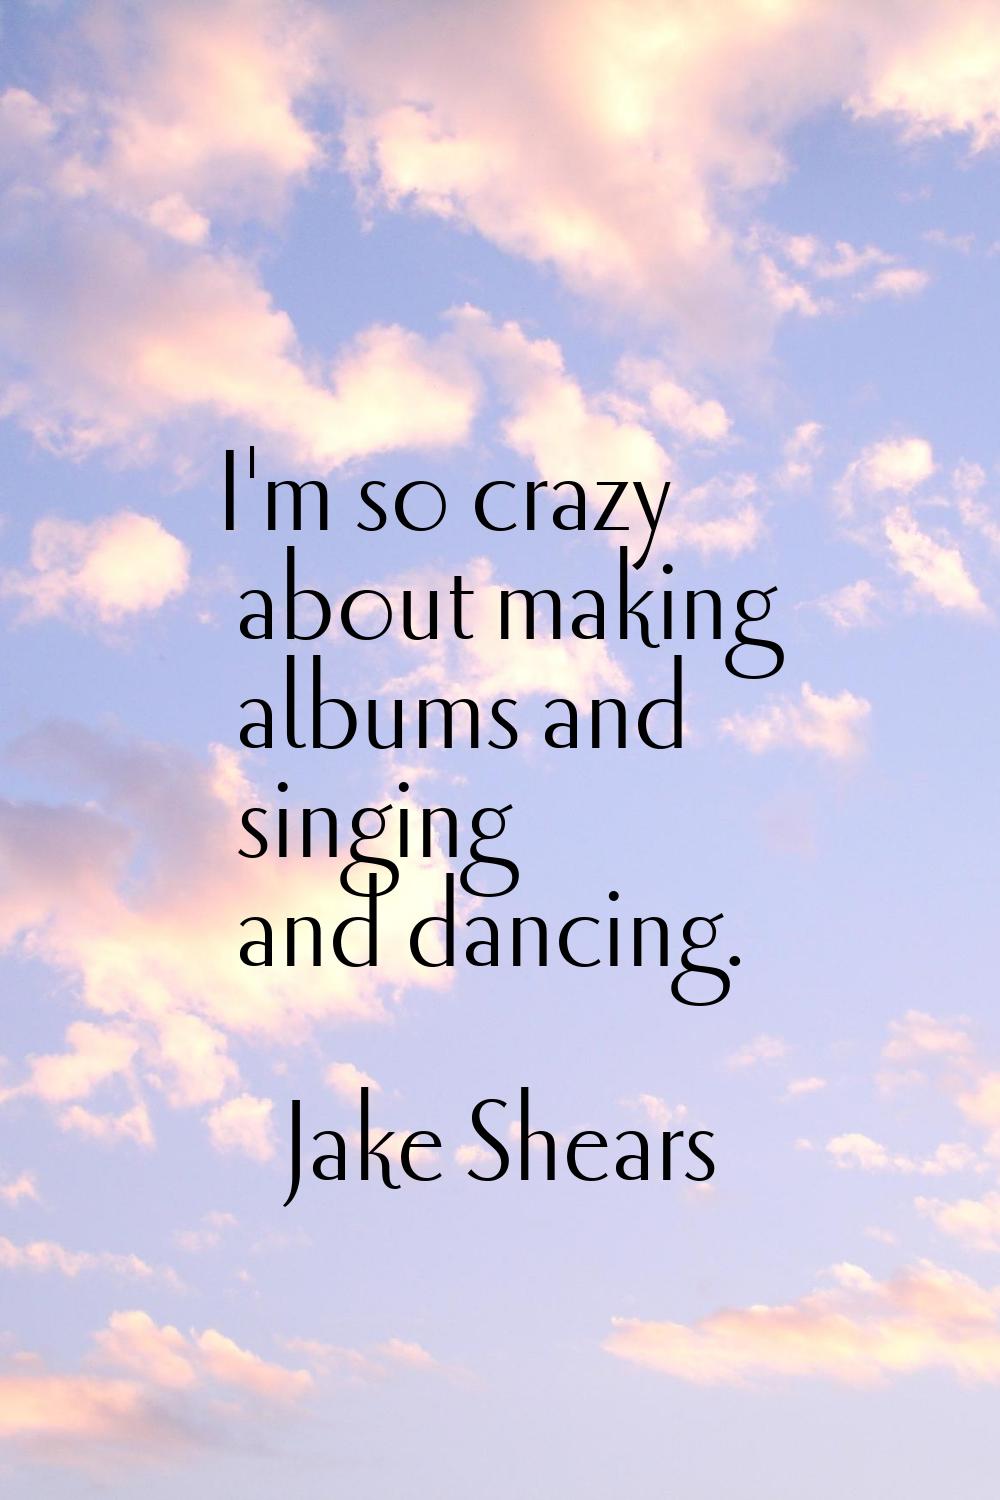 I'm so crazy about making albums and singing and dancing.